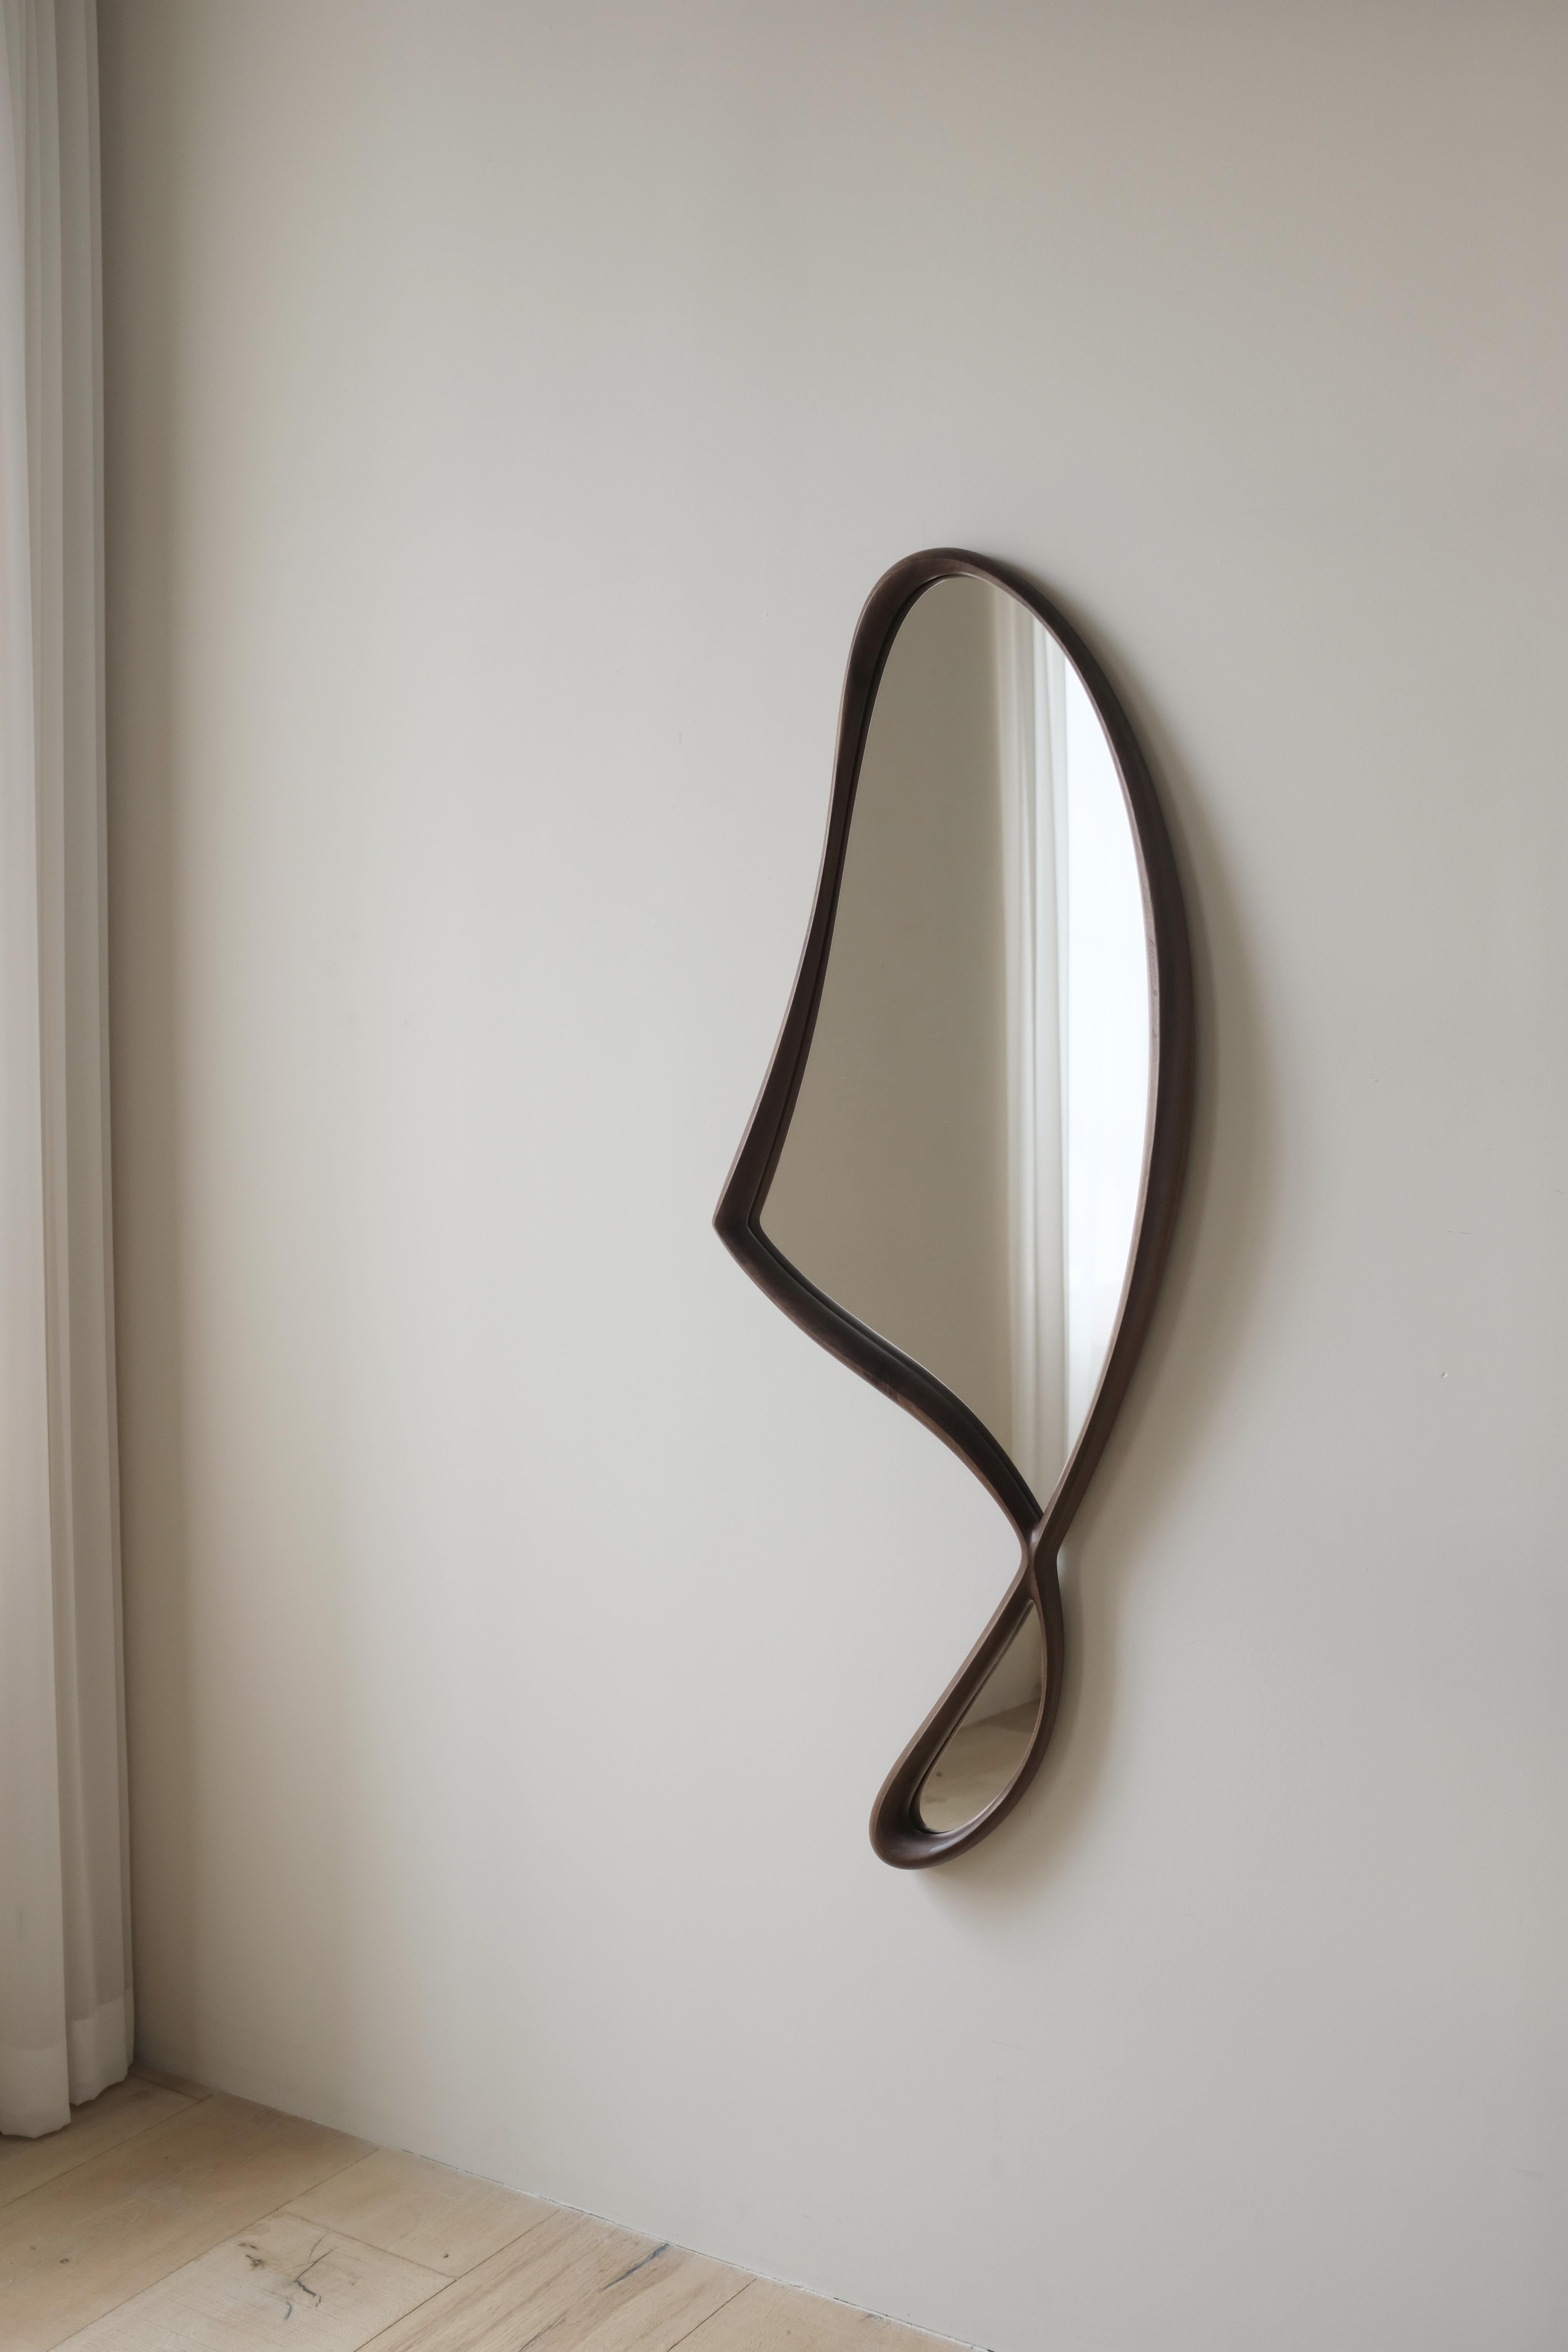 'Momentum Mirror II' by Soo Joo is a statement wooden wall mirror with a unique and timeless asymmetric form. The sculptural distilled form elevates any space. It hangs flush to the wall with custom-made steel French cleats, and can be hung